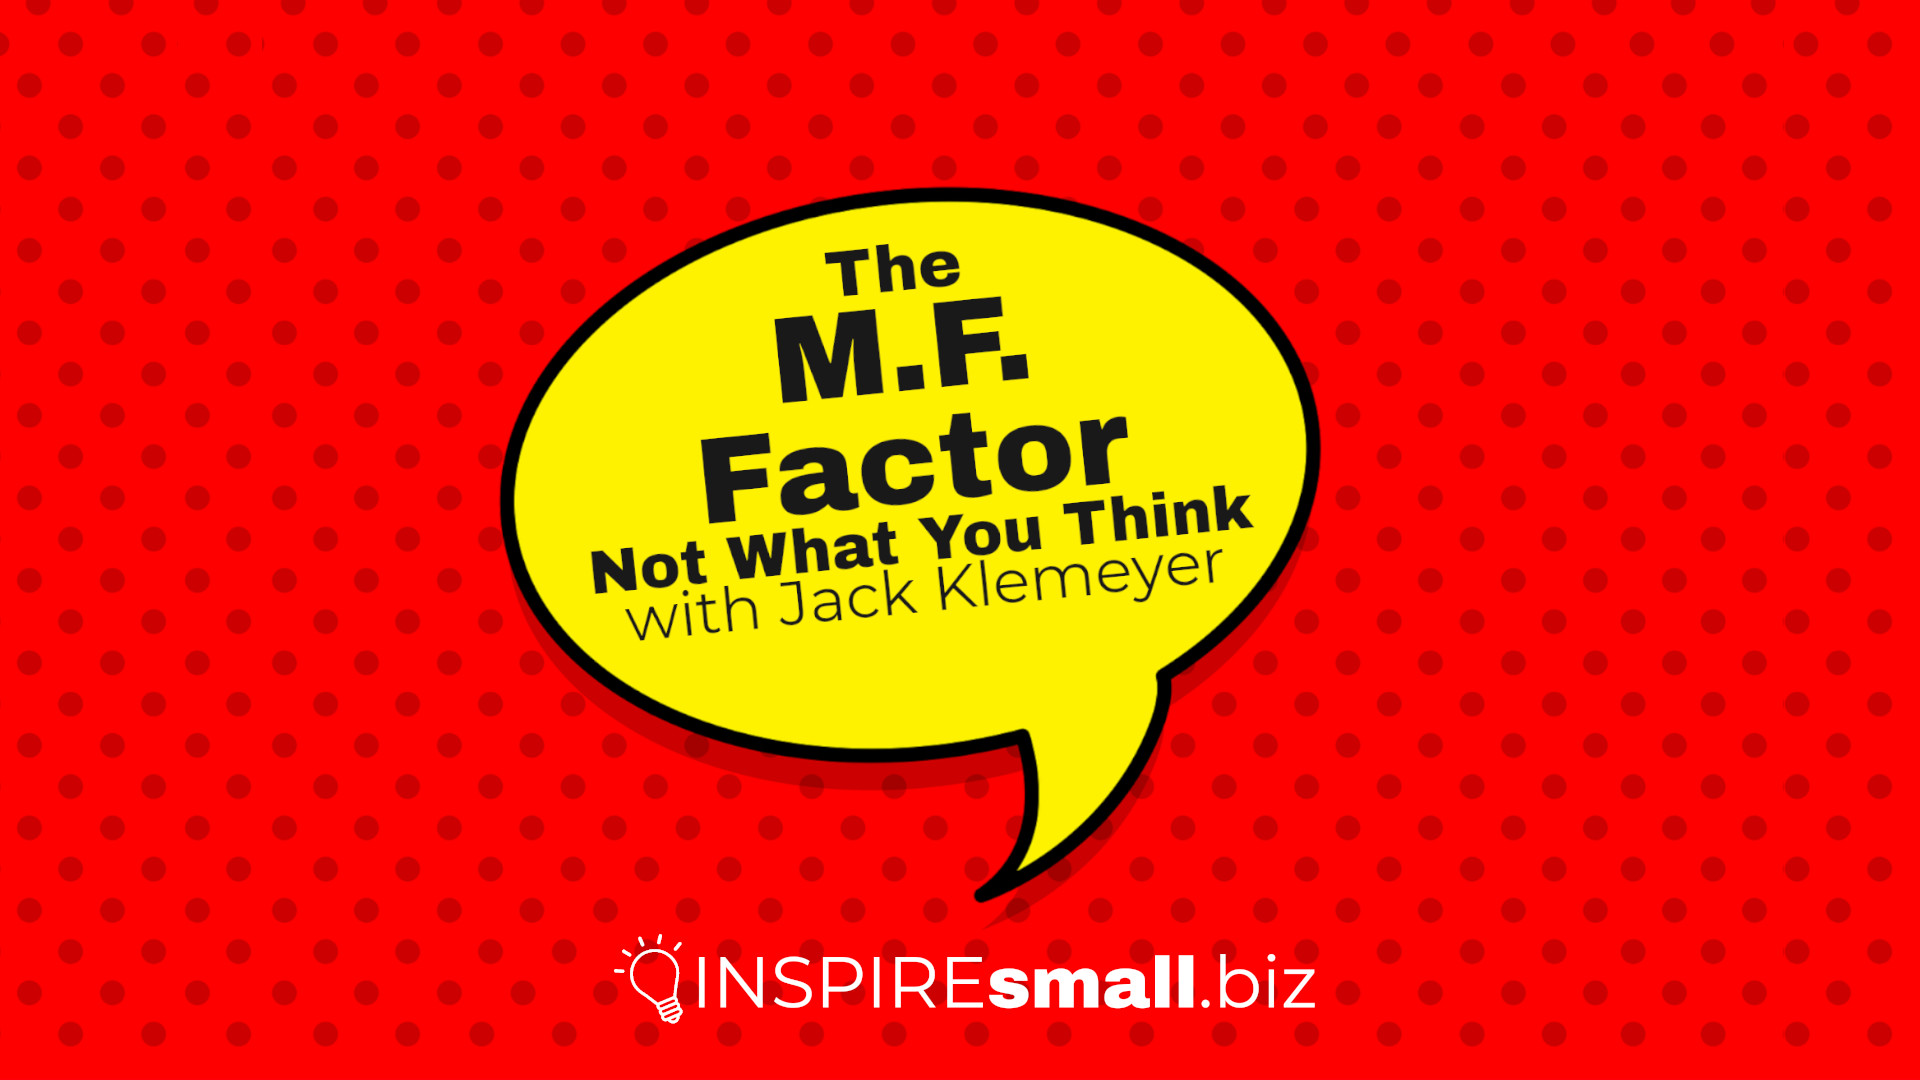 Yellow speech bubble with the text, The M.F. Factor - Not What You Think with Jack Klemeyer, hosted by INSPIREsmall.biz